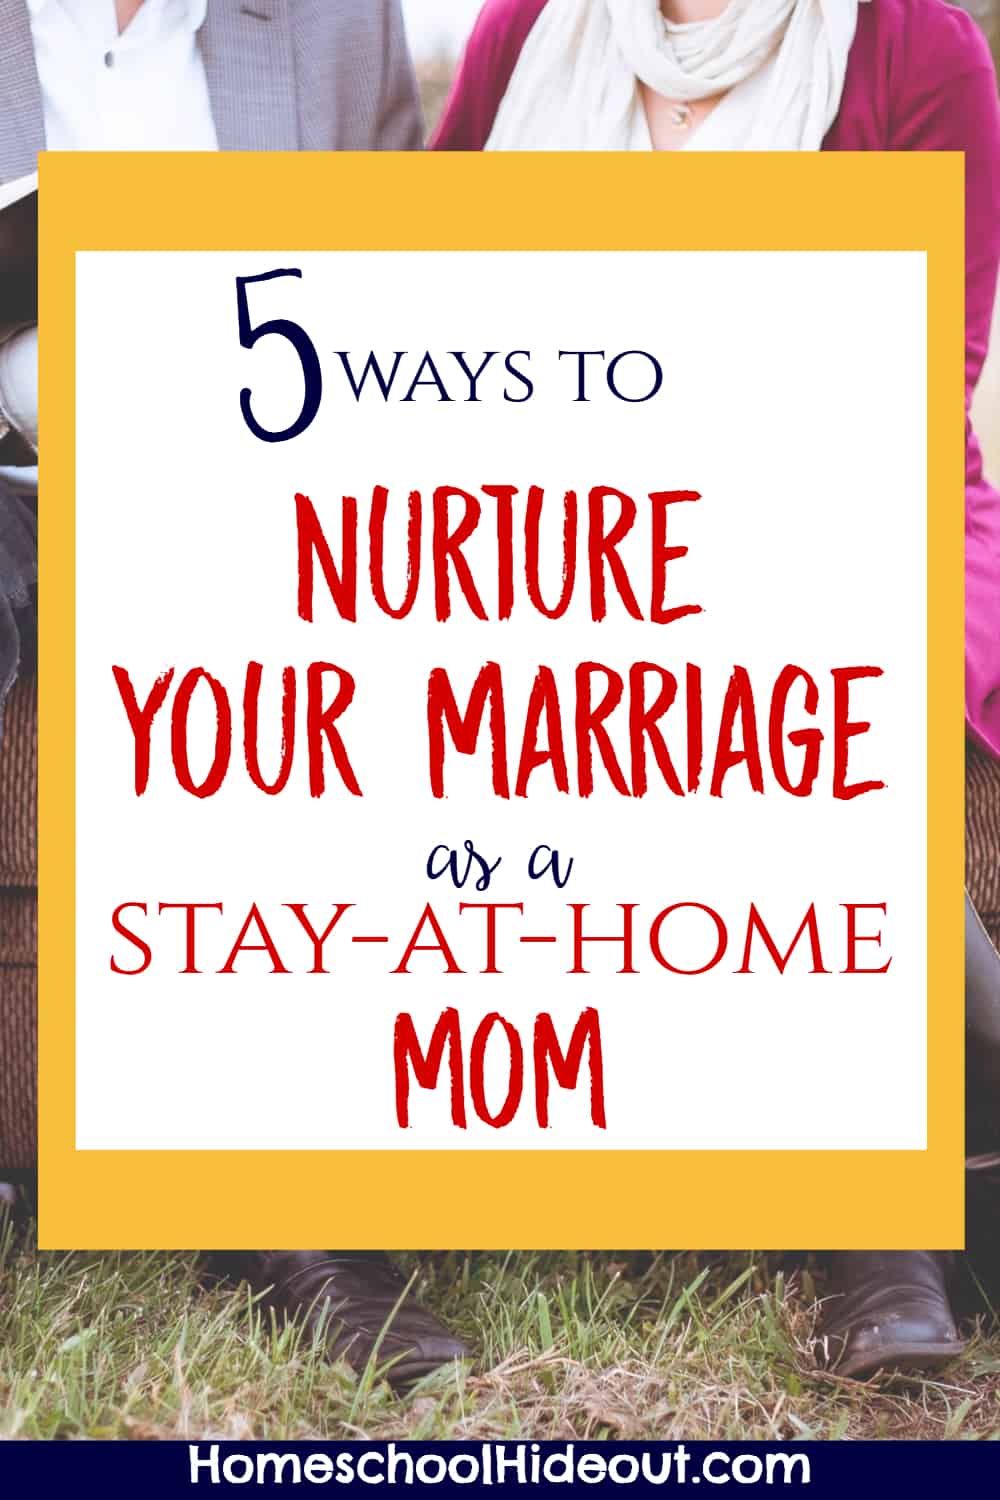 Super awesome ideas to nurture your marriage as a stay-at-home mom. Quit pushing your hubby to the back burner and watch your marriage thrive!